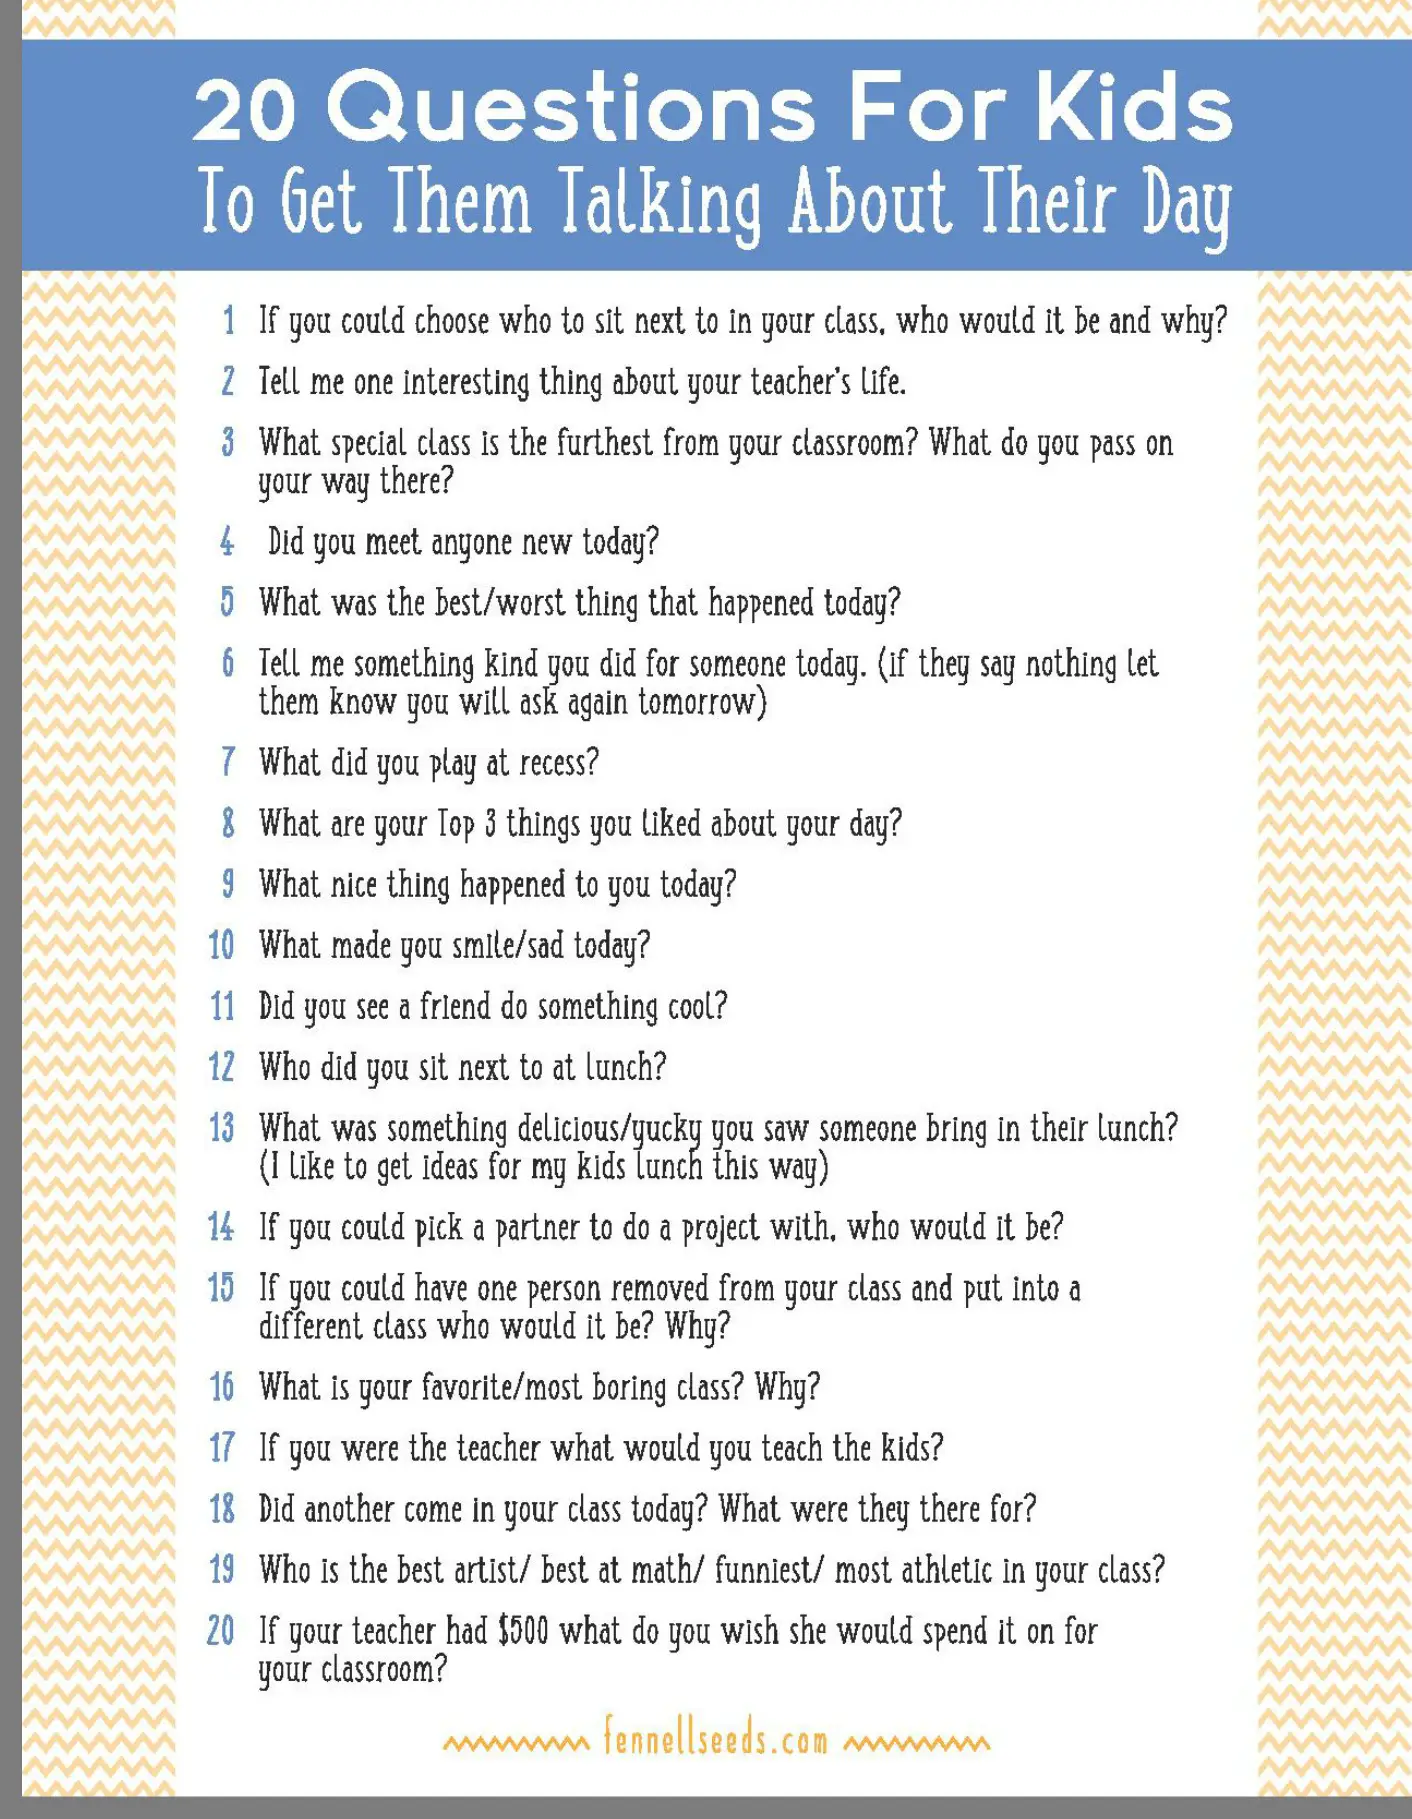 15 Questions For Kids To Get Them Talking About Their Day